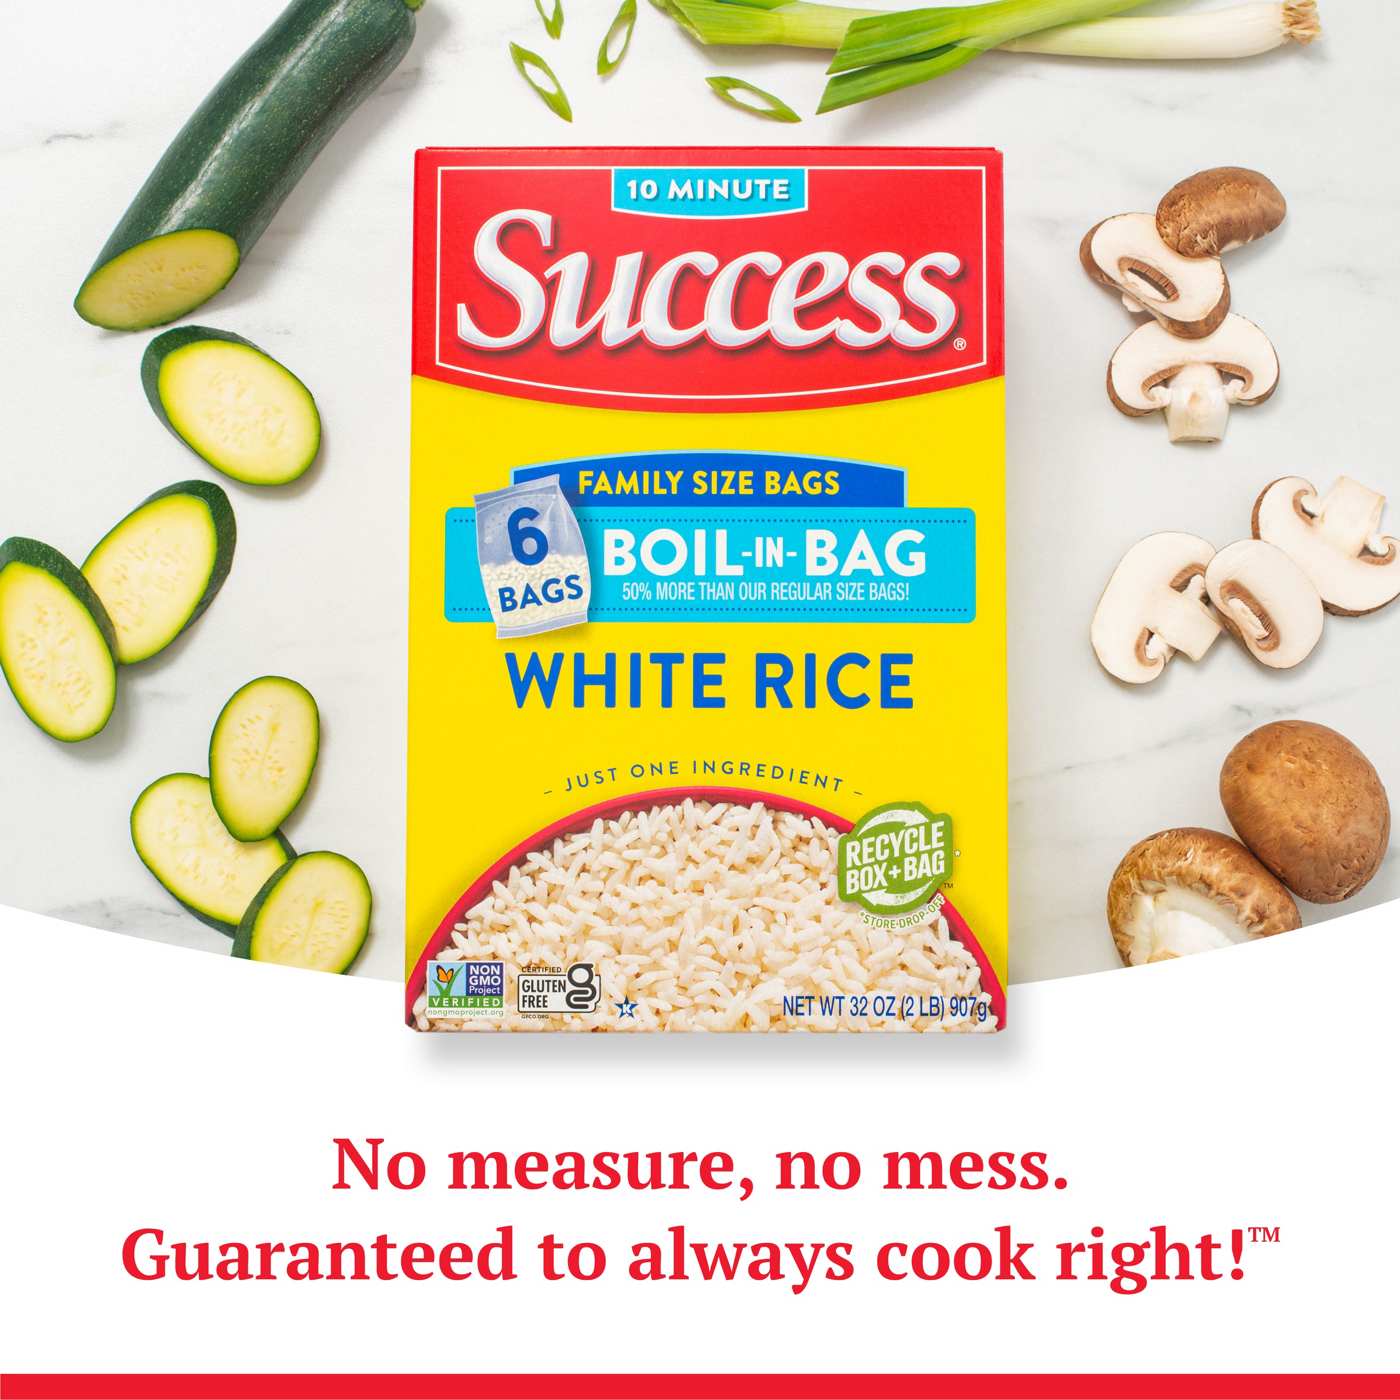 Success Boil-in-Bag White Rice Family Size Bags; image 2 of 7